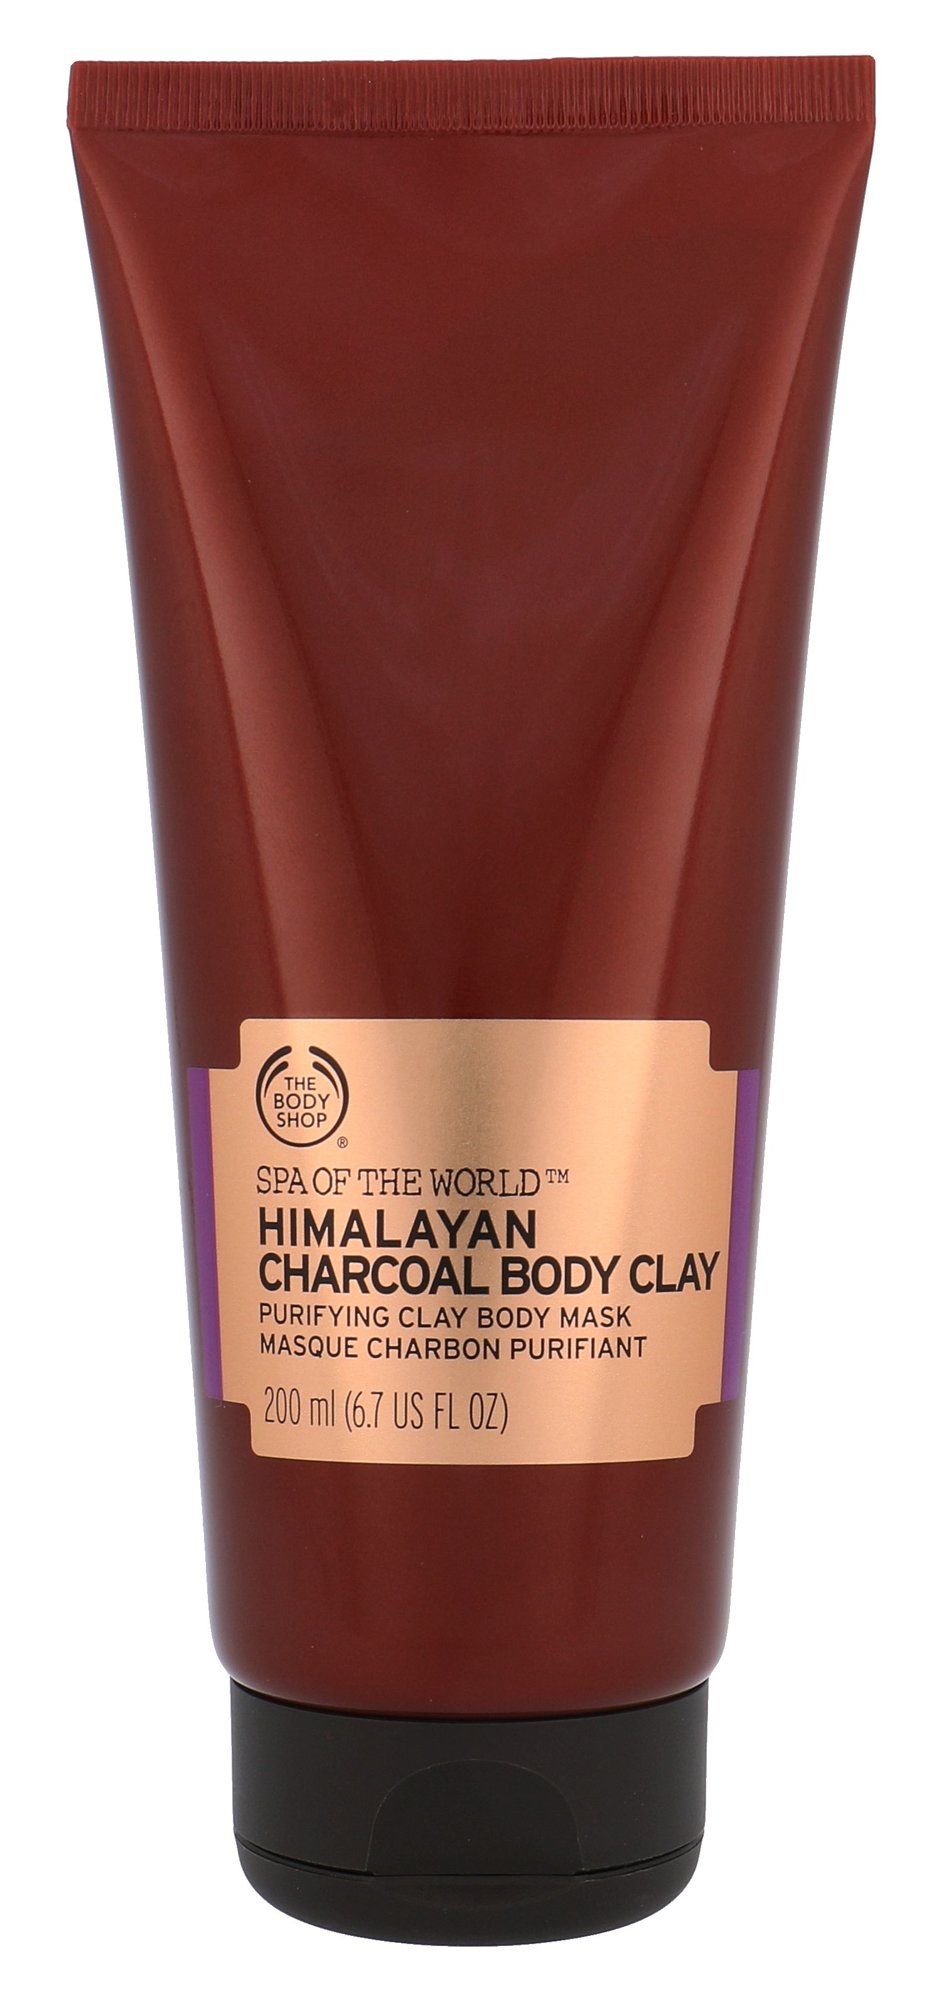 The Body Shop Spa Of The World Himalayan Charcoal Body Clay